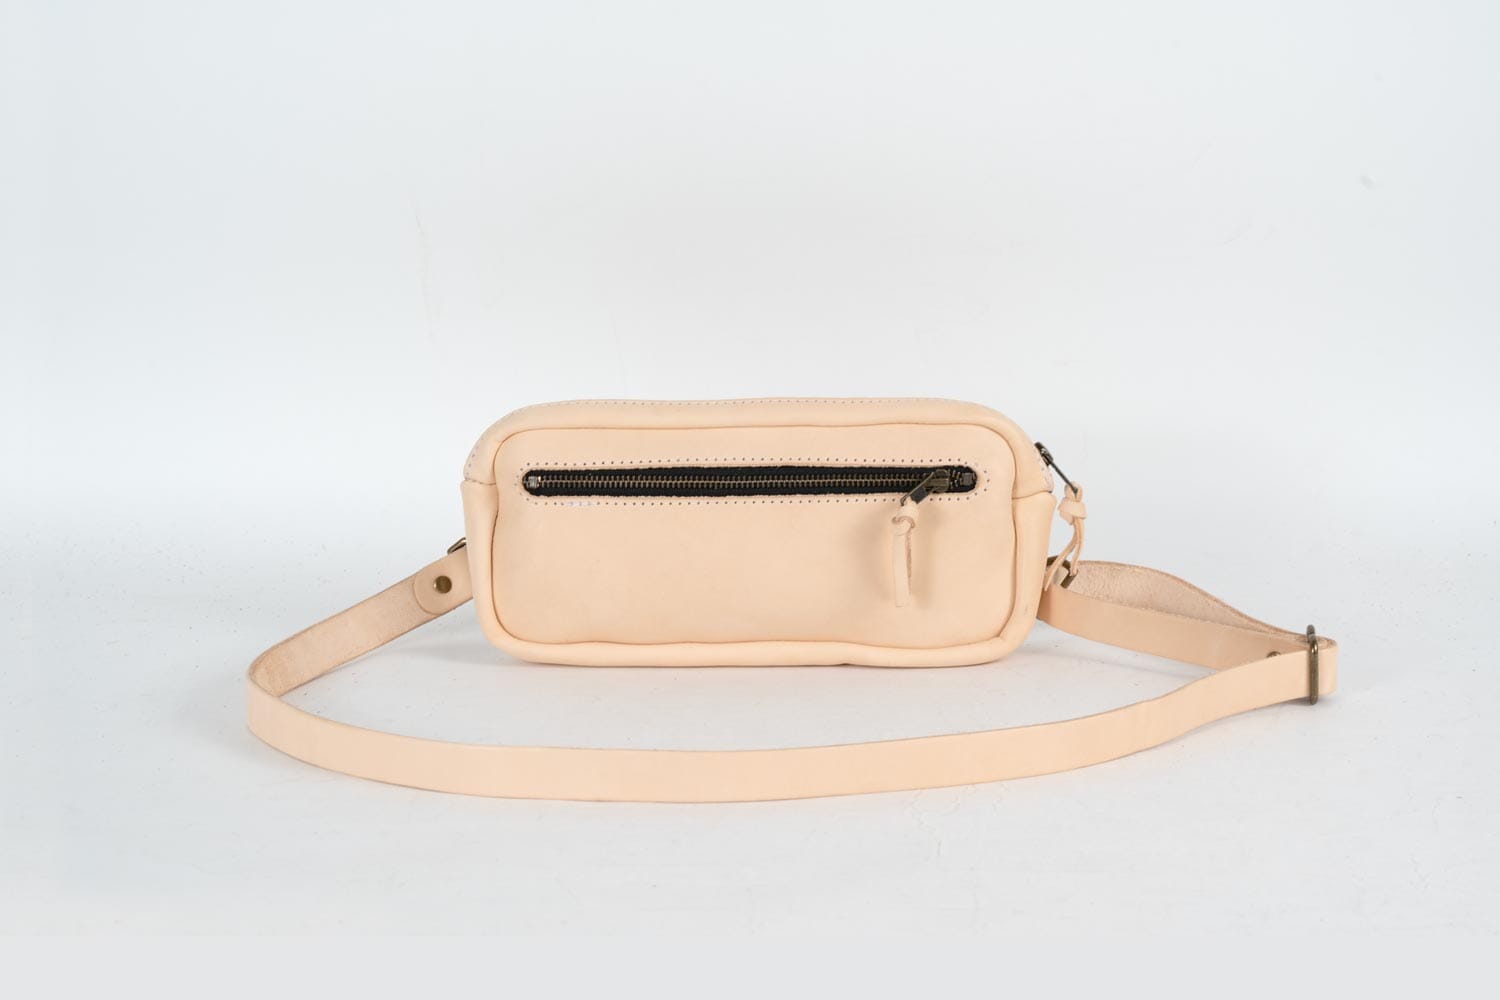 LEATHER FANNY PACK / LEATHER WAIST BAG - DELUXE - NATURAL VEG TAN (READY TO SHIP)